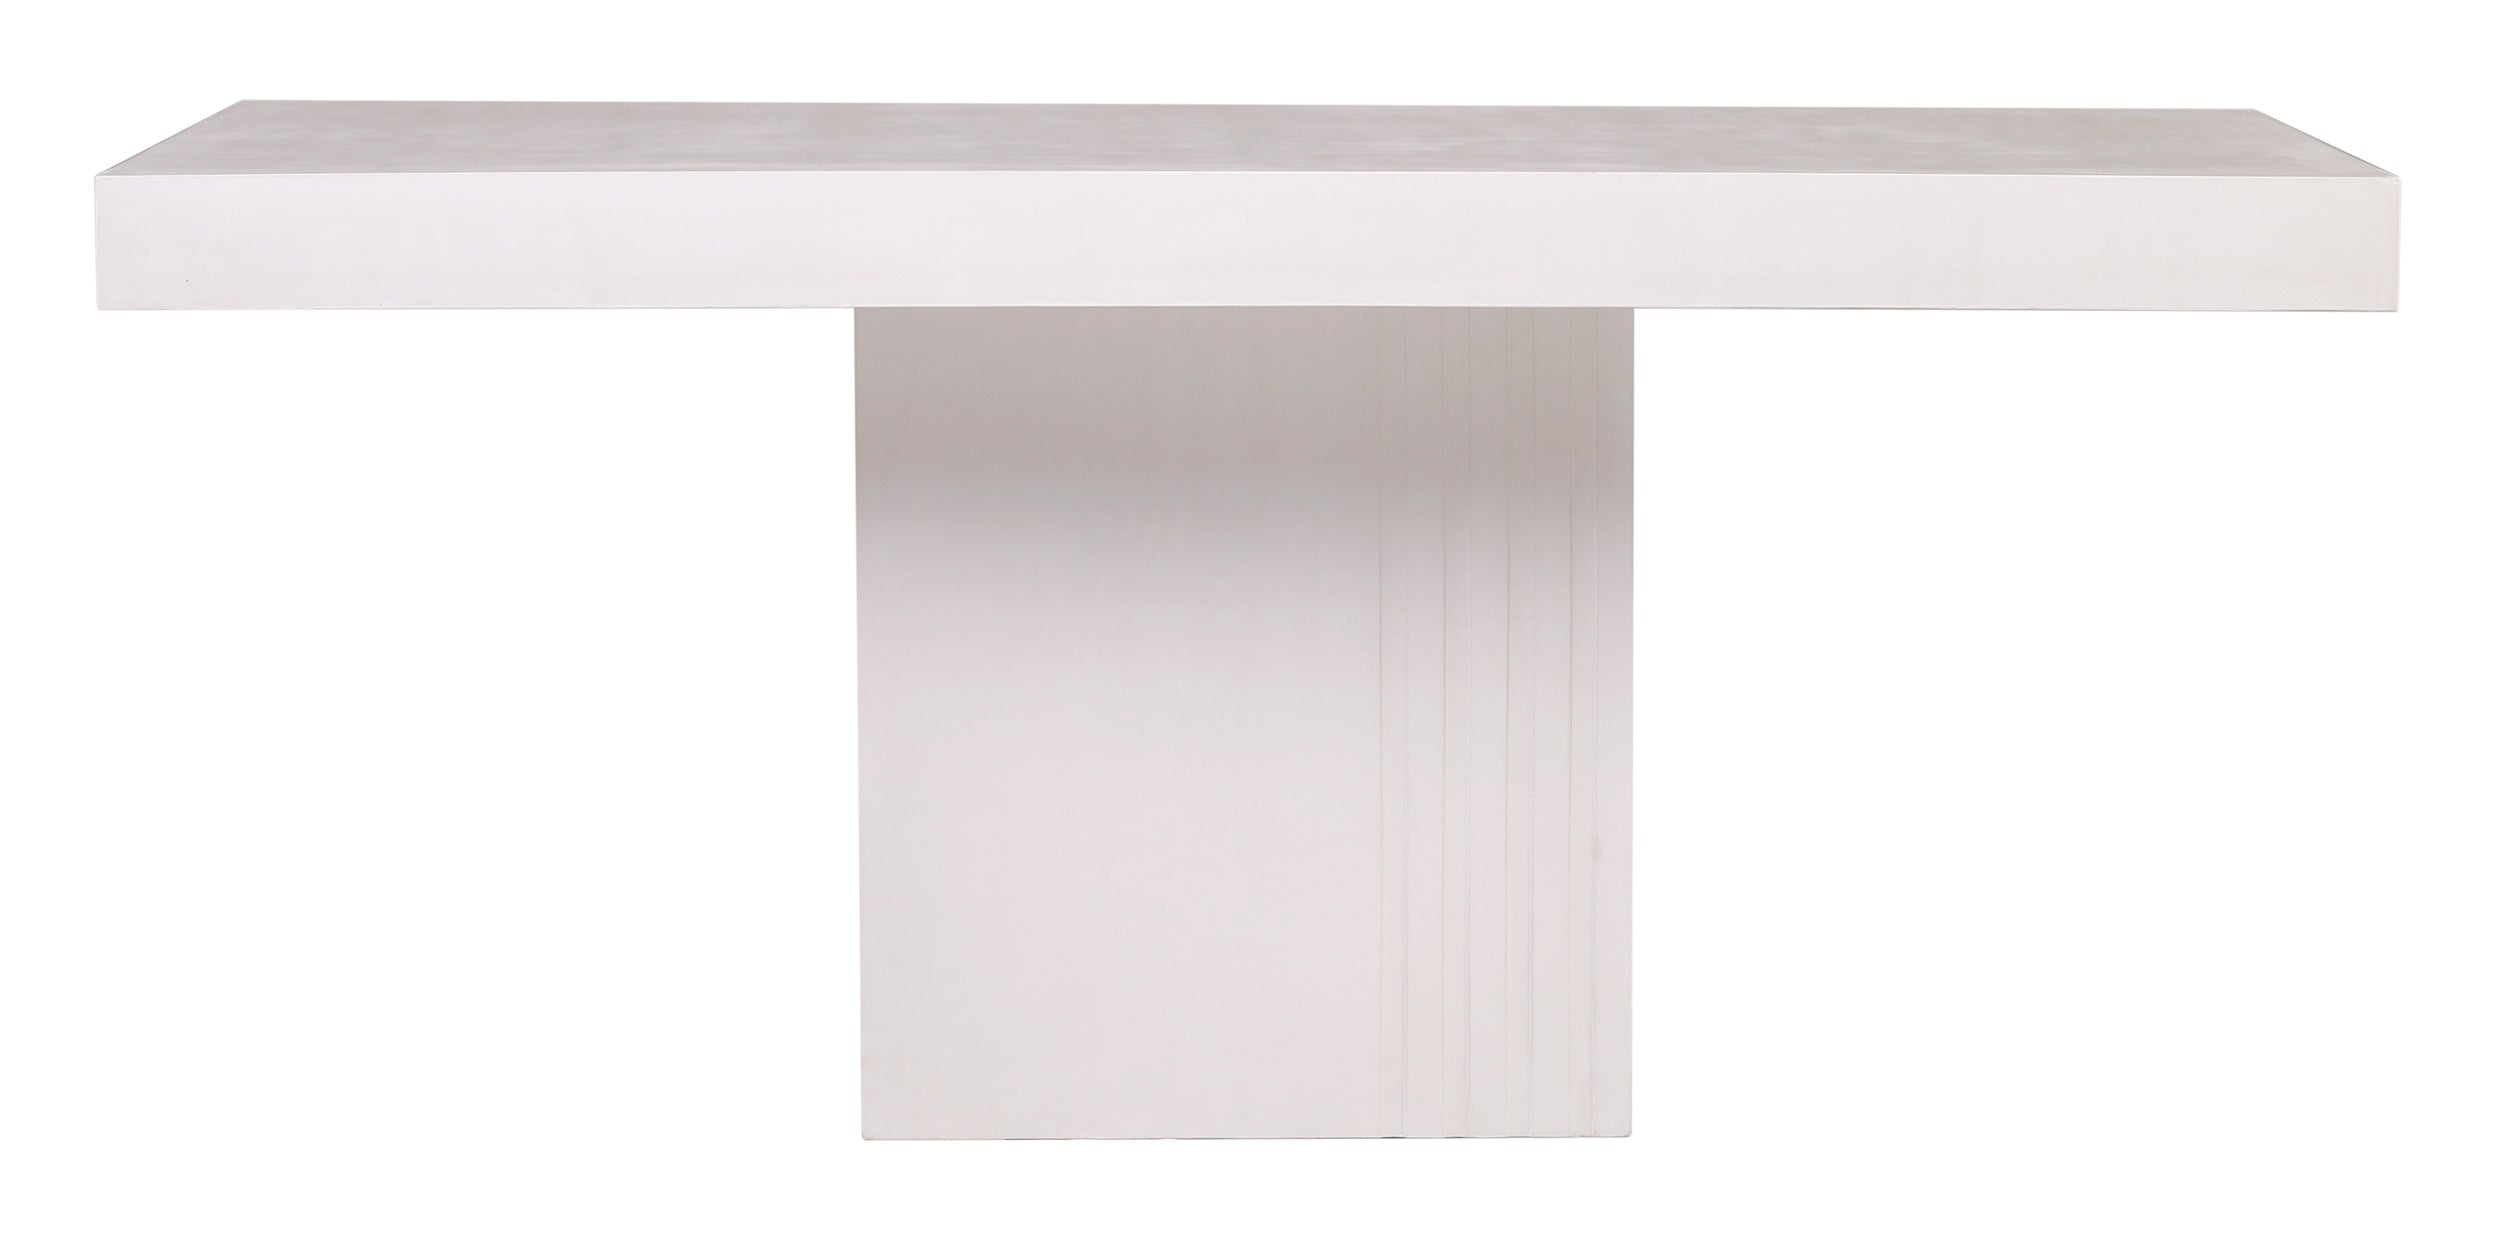 Tama Rectangle Dining Table - Single Pedestal - Ivory White Outdoor Dining Table